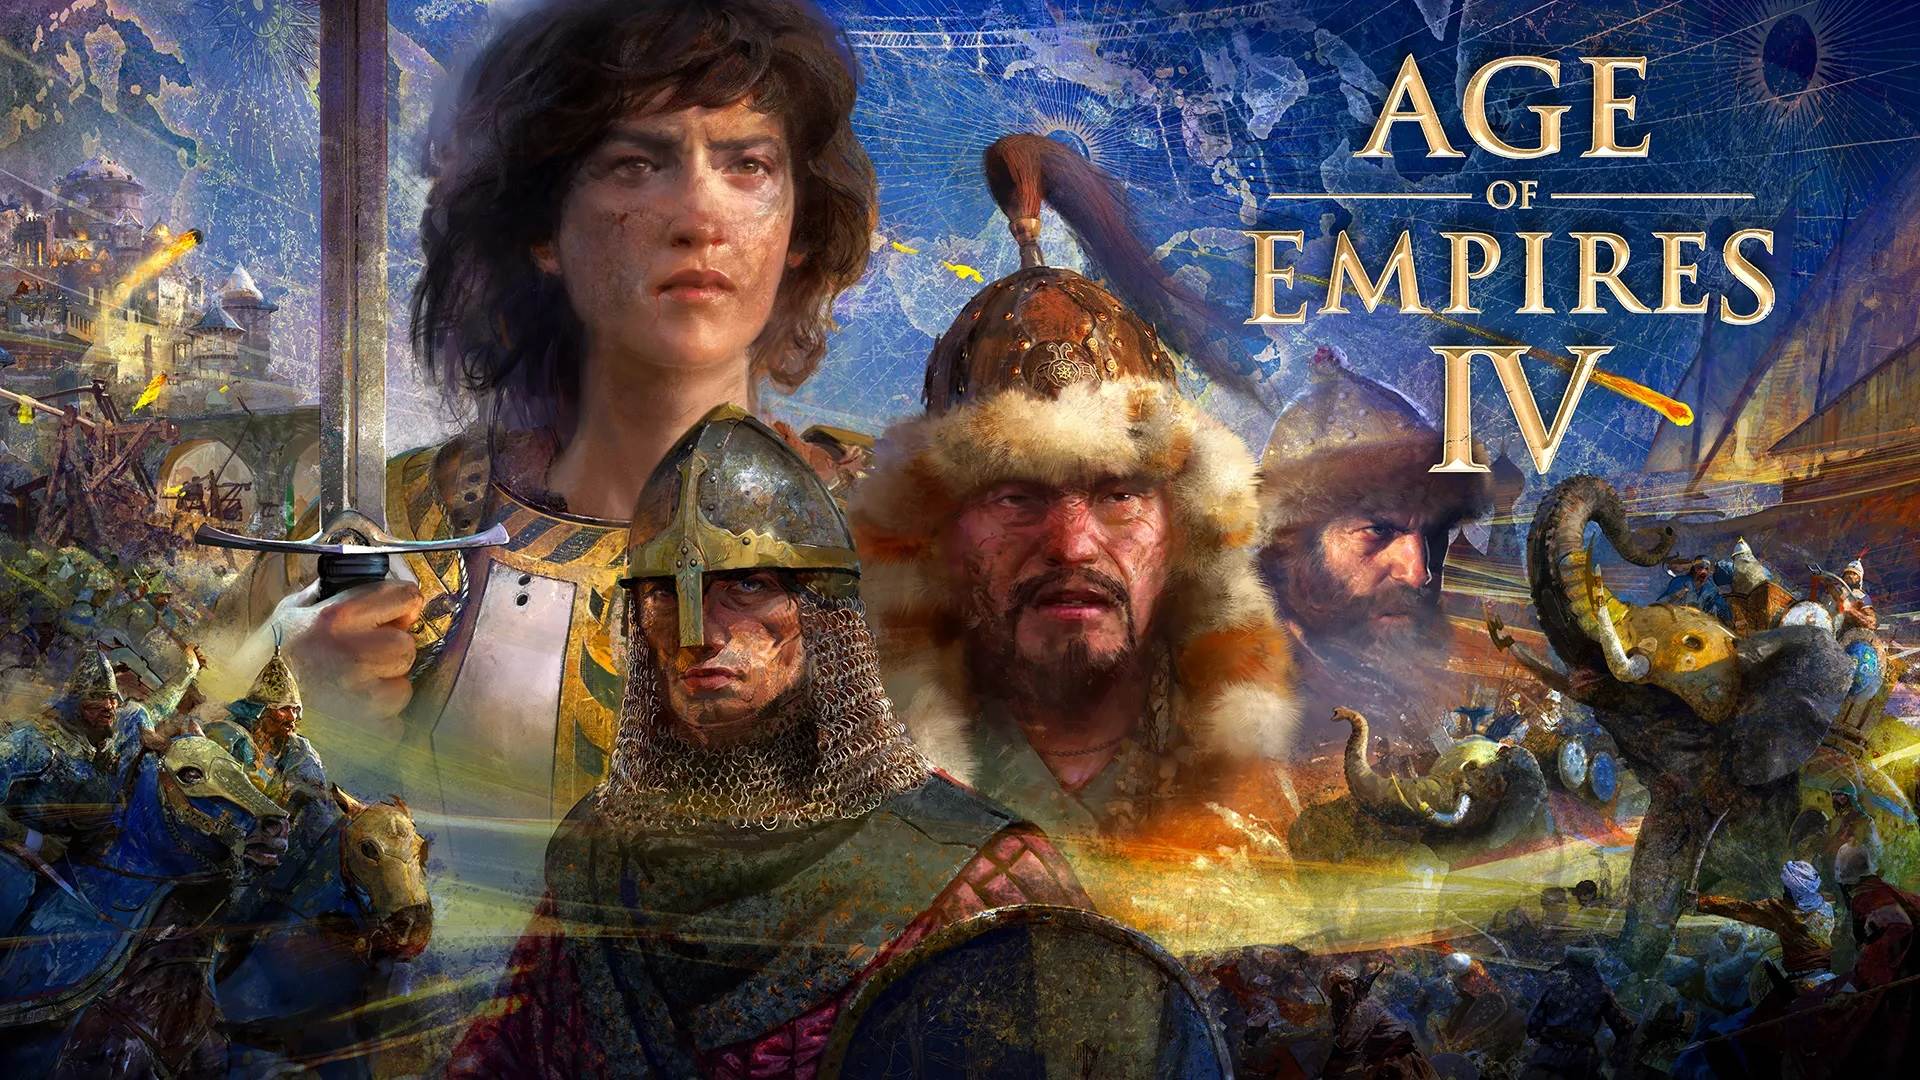  Age of Empires IV.jpg 